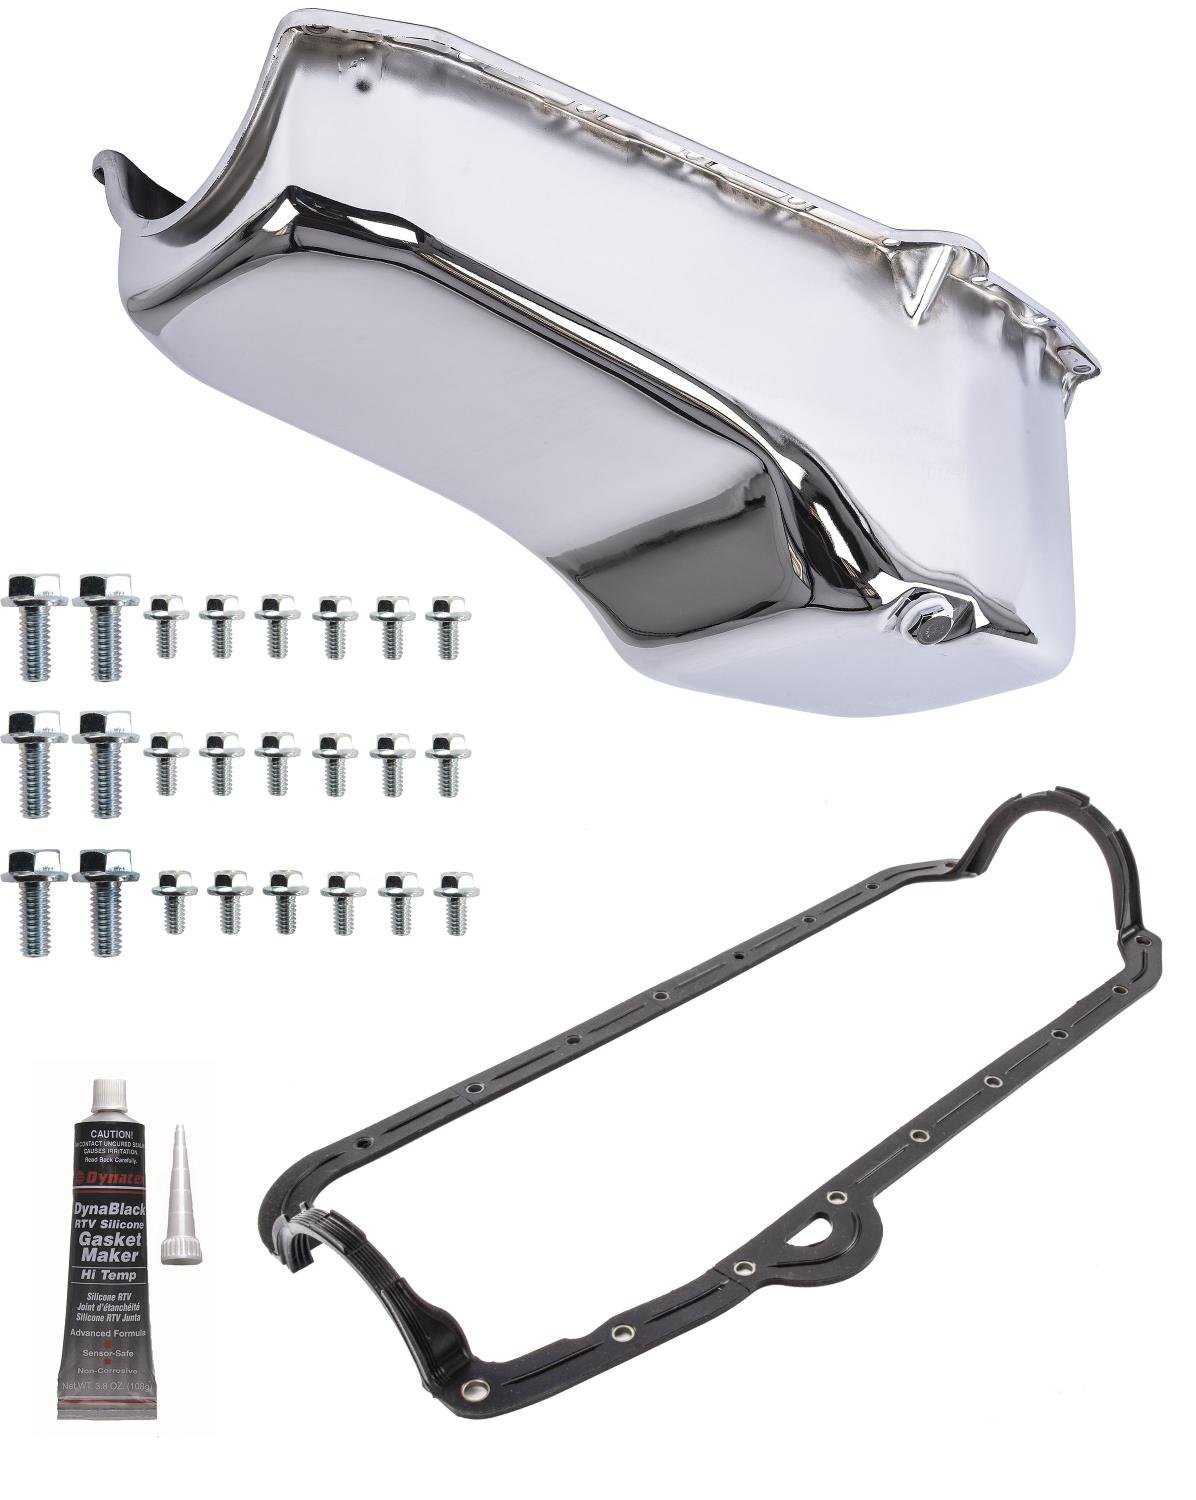 Stock-Style Replacement Oil Pan Kit without Oil Pump for 1955-1980 Small Block Chevy with Left/Driver Side Dip Stick [Chrome]